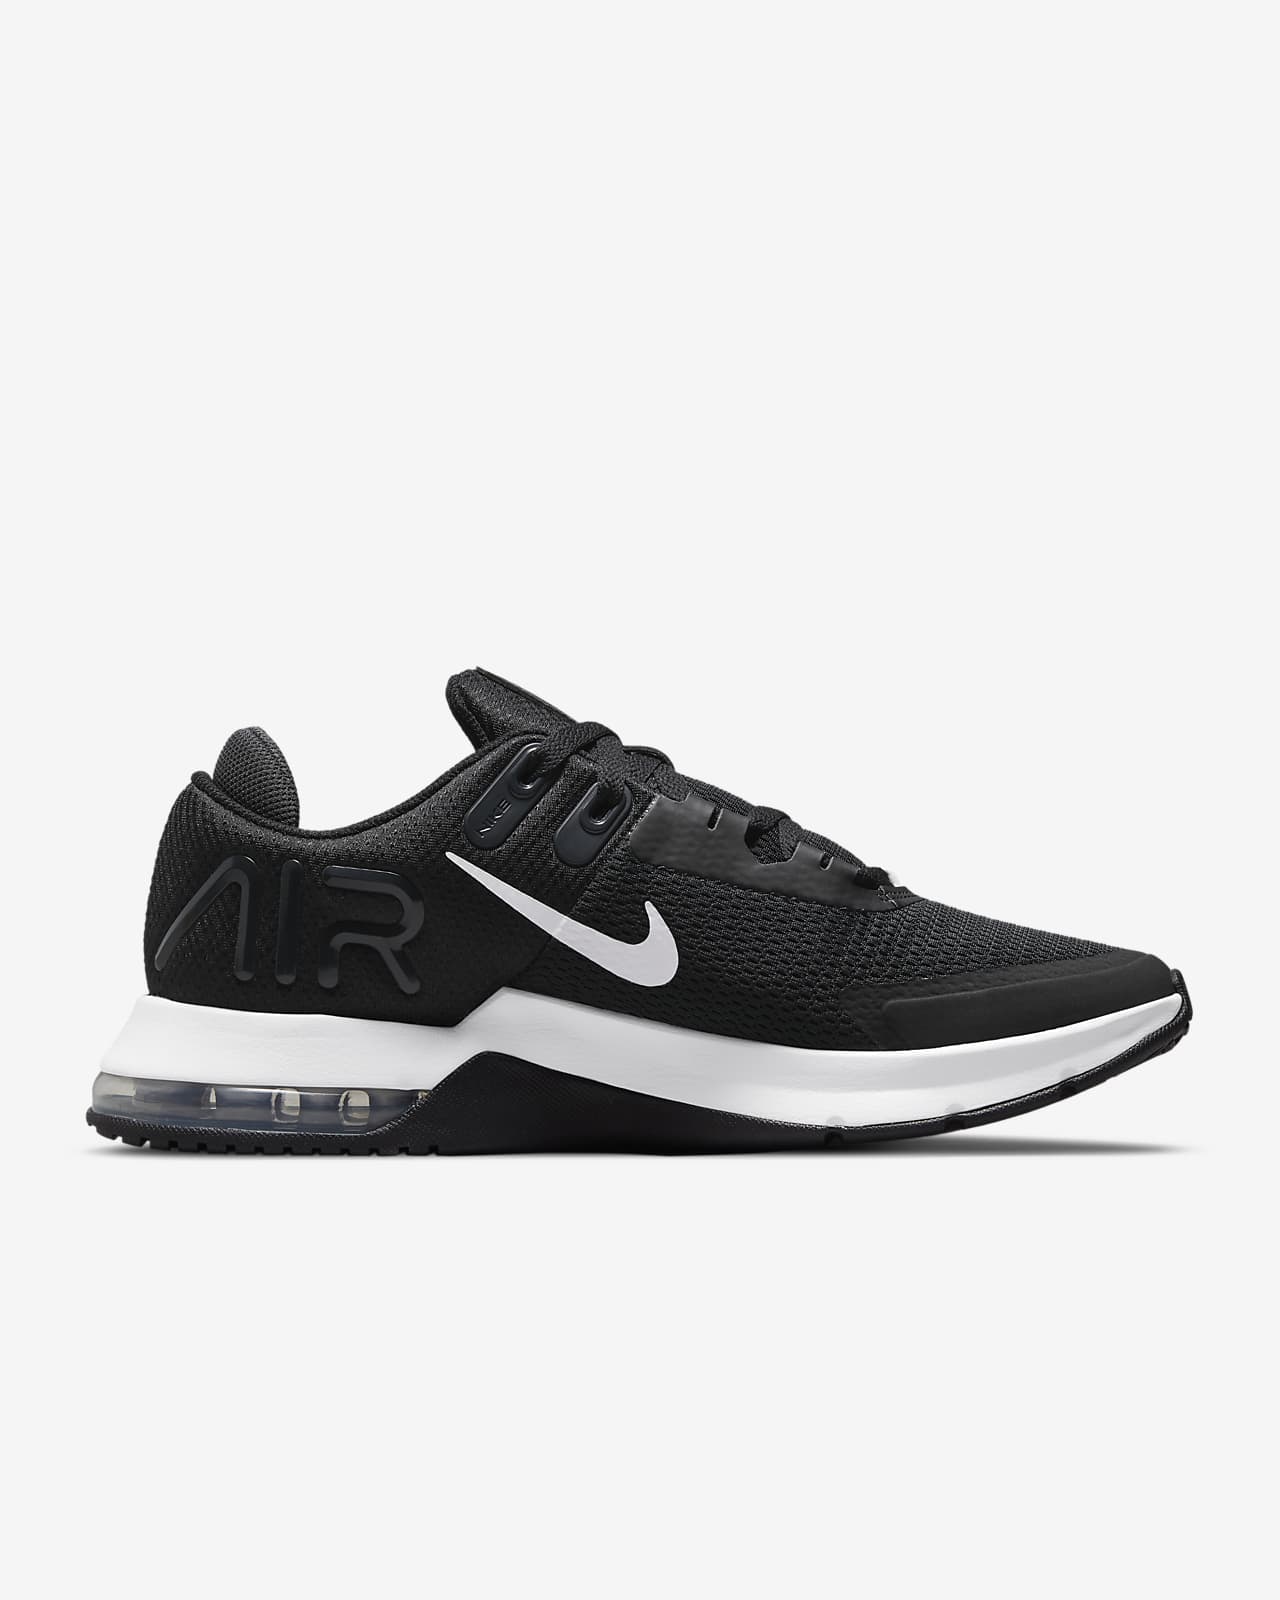 Scintillait Le respect Moelle osseuse nike air max alpha trainer on ...